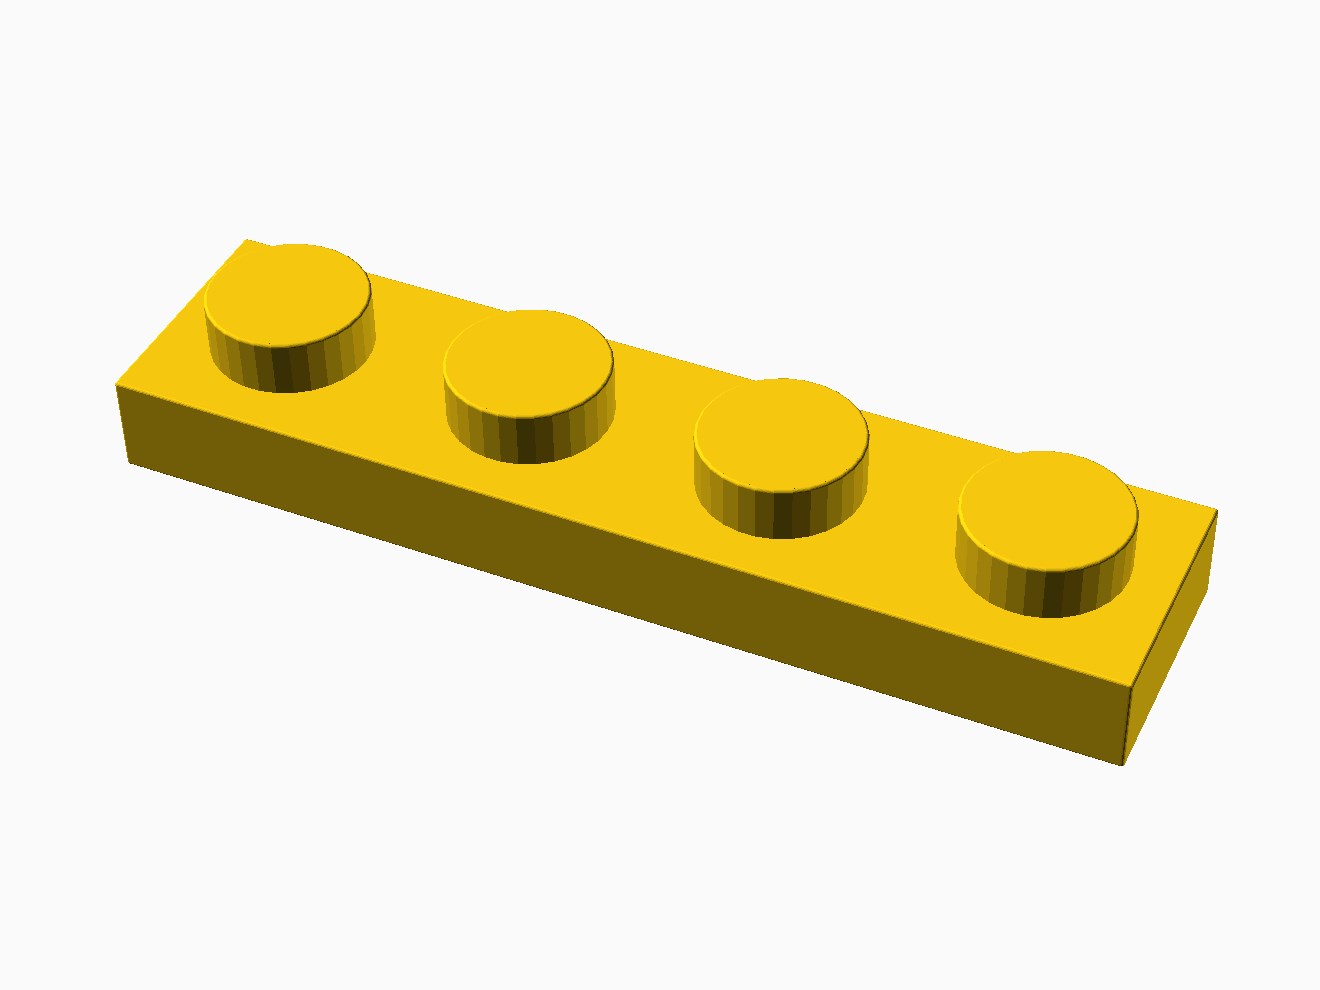 3D printable model of a LEGO 4x1 Plate with standard knobs.